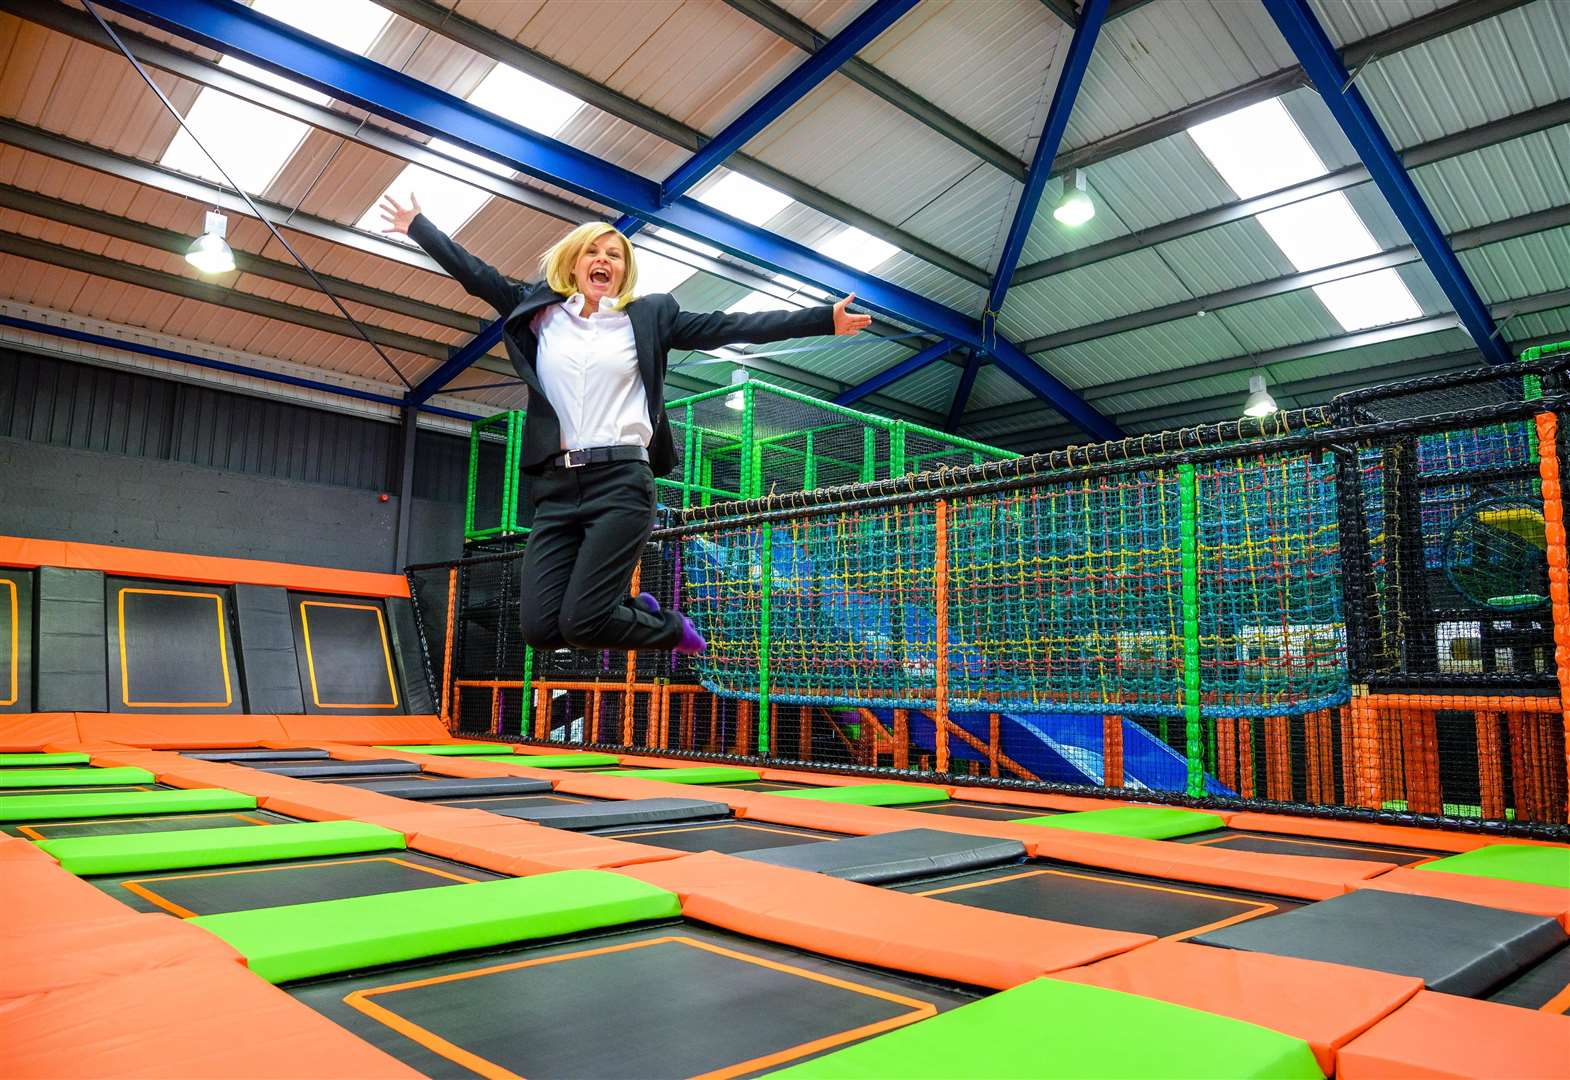 Who hasn't been to diss and not heard of Jump warehouse? It’s an exciting park as seen for kids to enjoy trampolines and refreshments on site